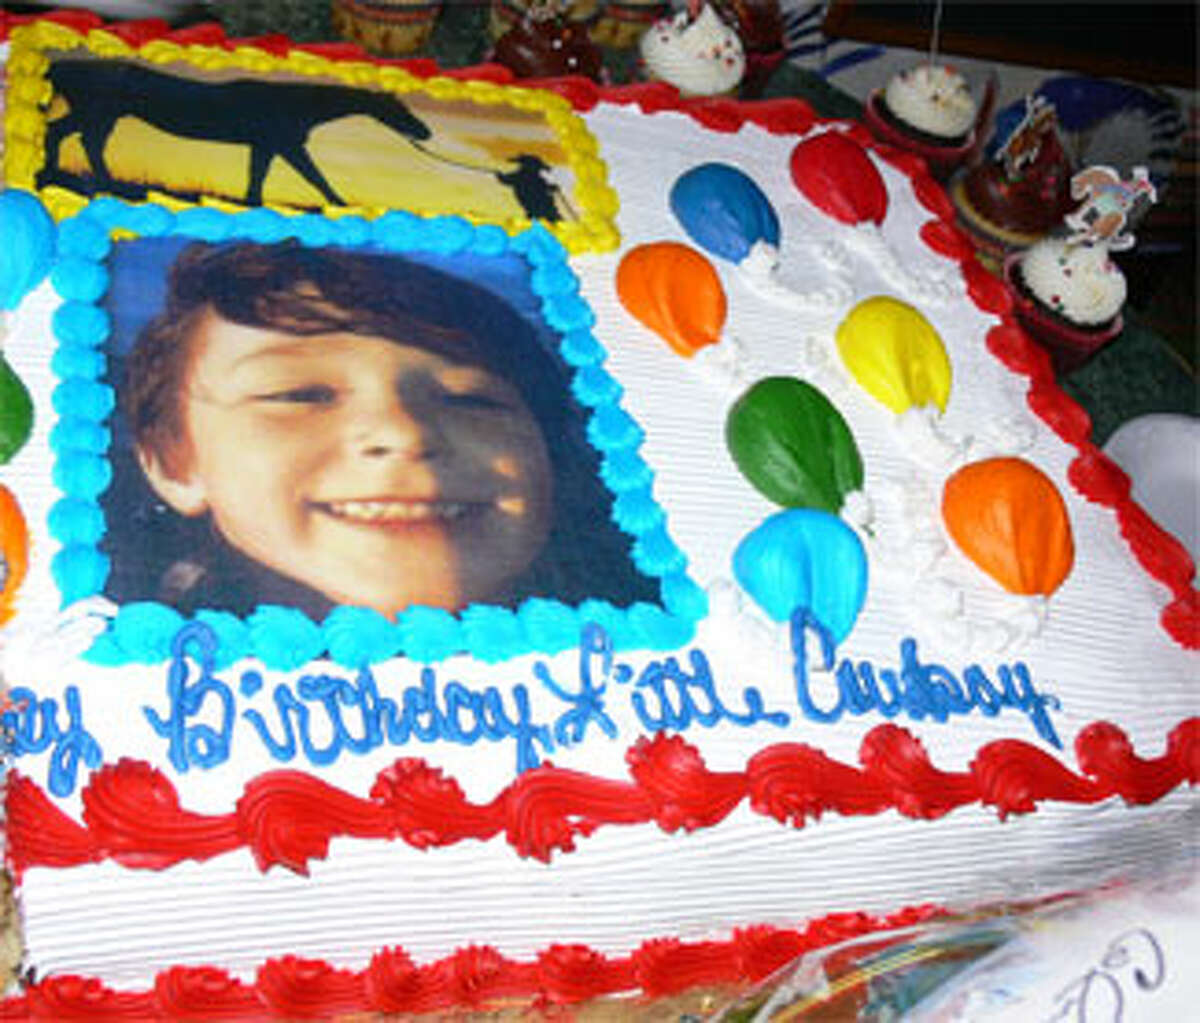 A birthday cake for the late Jesse Lewis at the 2013 SHS '81 fund-raising event with the message, “Happy Birthday Little Cowboy.”